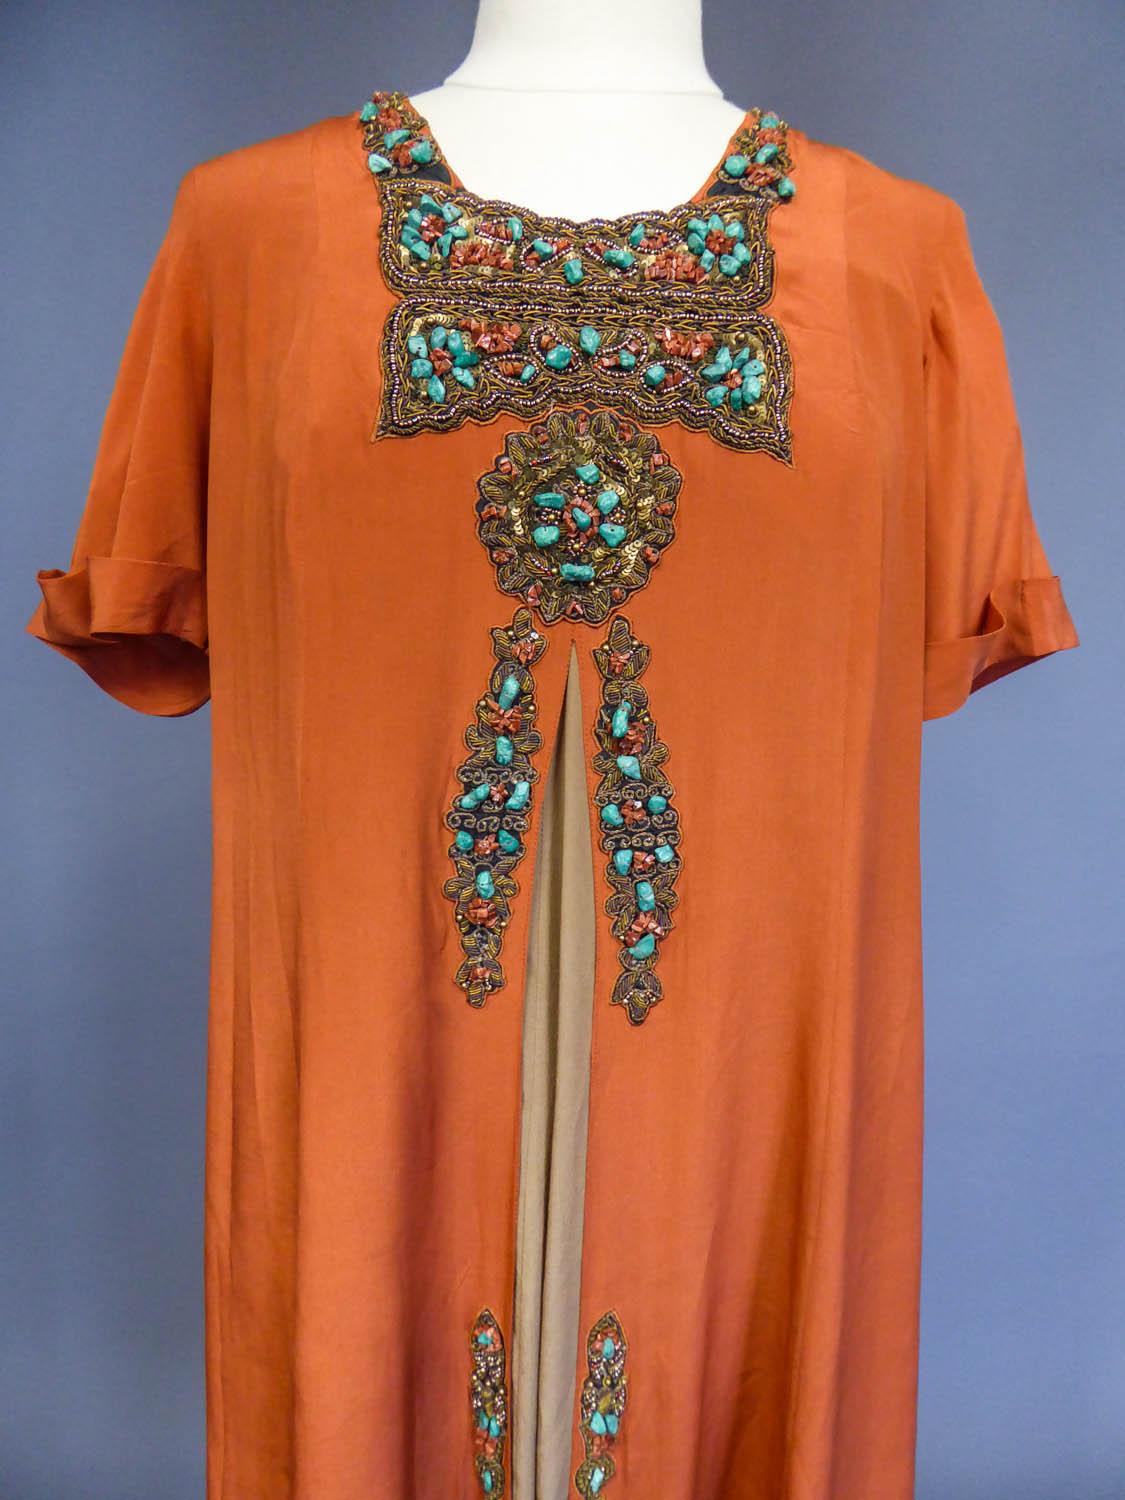 Circa 1960
Europe

A surprising little jewel dress in the orientalist style of the 1920s. Orange rust silk crepe with rich embroidery of pearls, sequins and gold chenilles, all set with oranges raw stones and turquoises! Small short sleeves with